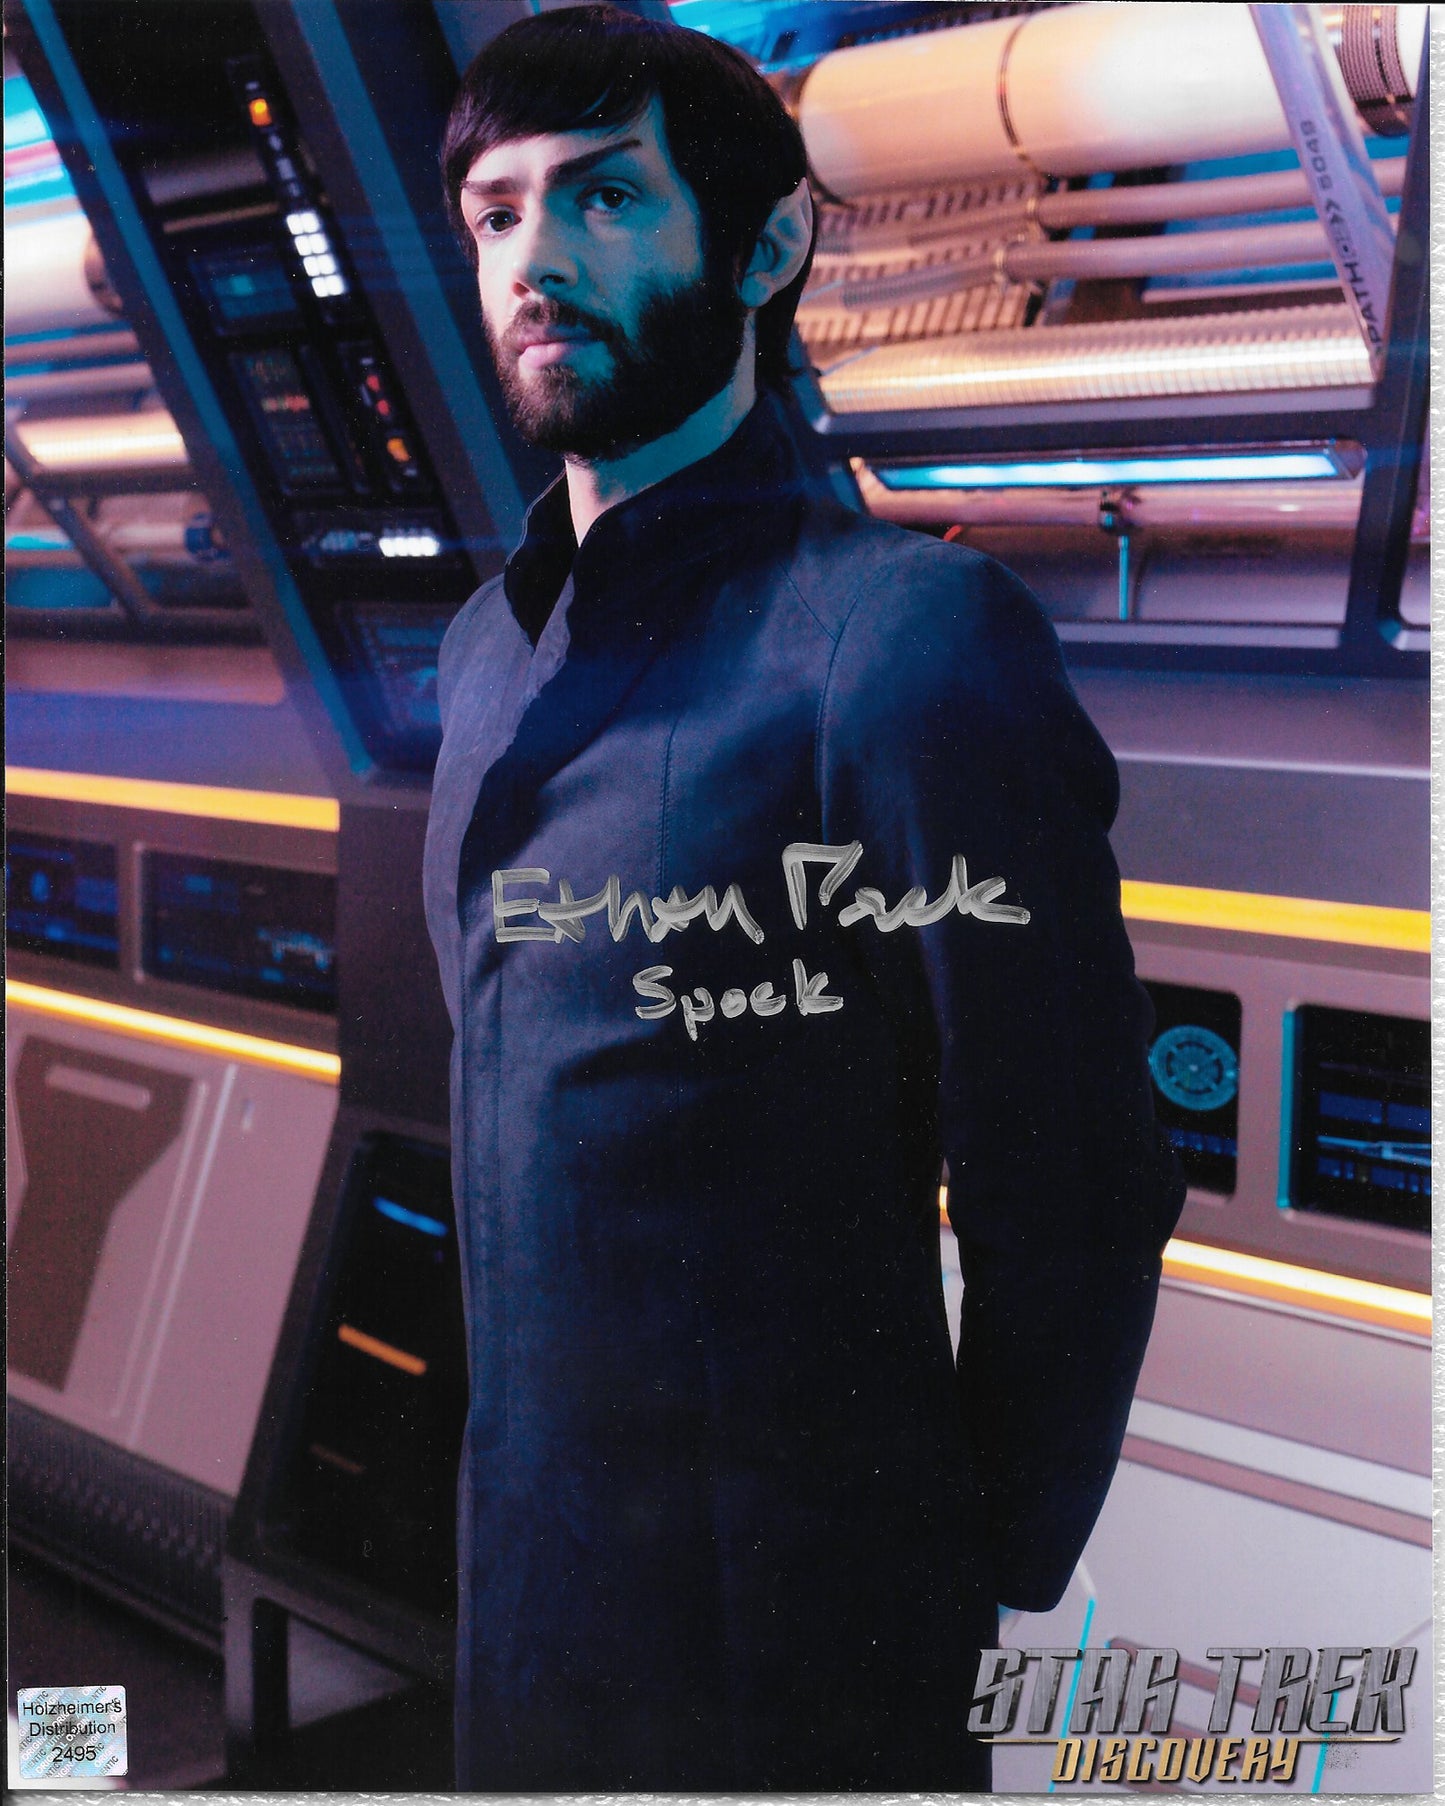 Ethan Peck (Spock) 8in x 10in AUTOGRAPH Photo ST-Discovery Silver-sharpie CHARACTER NAME RARE